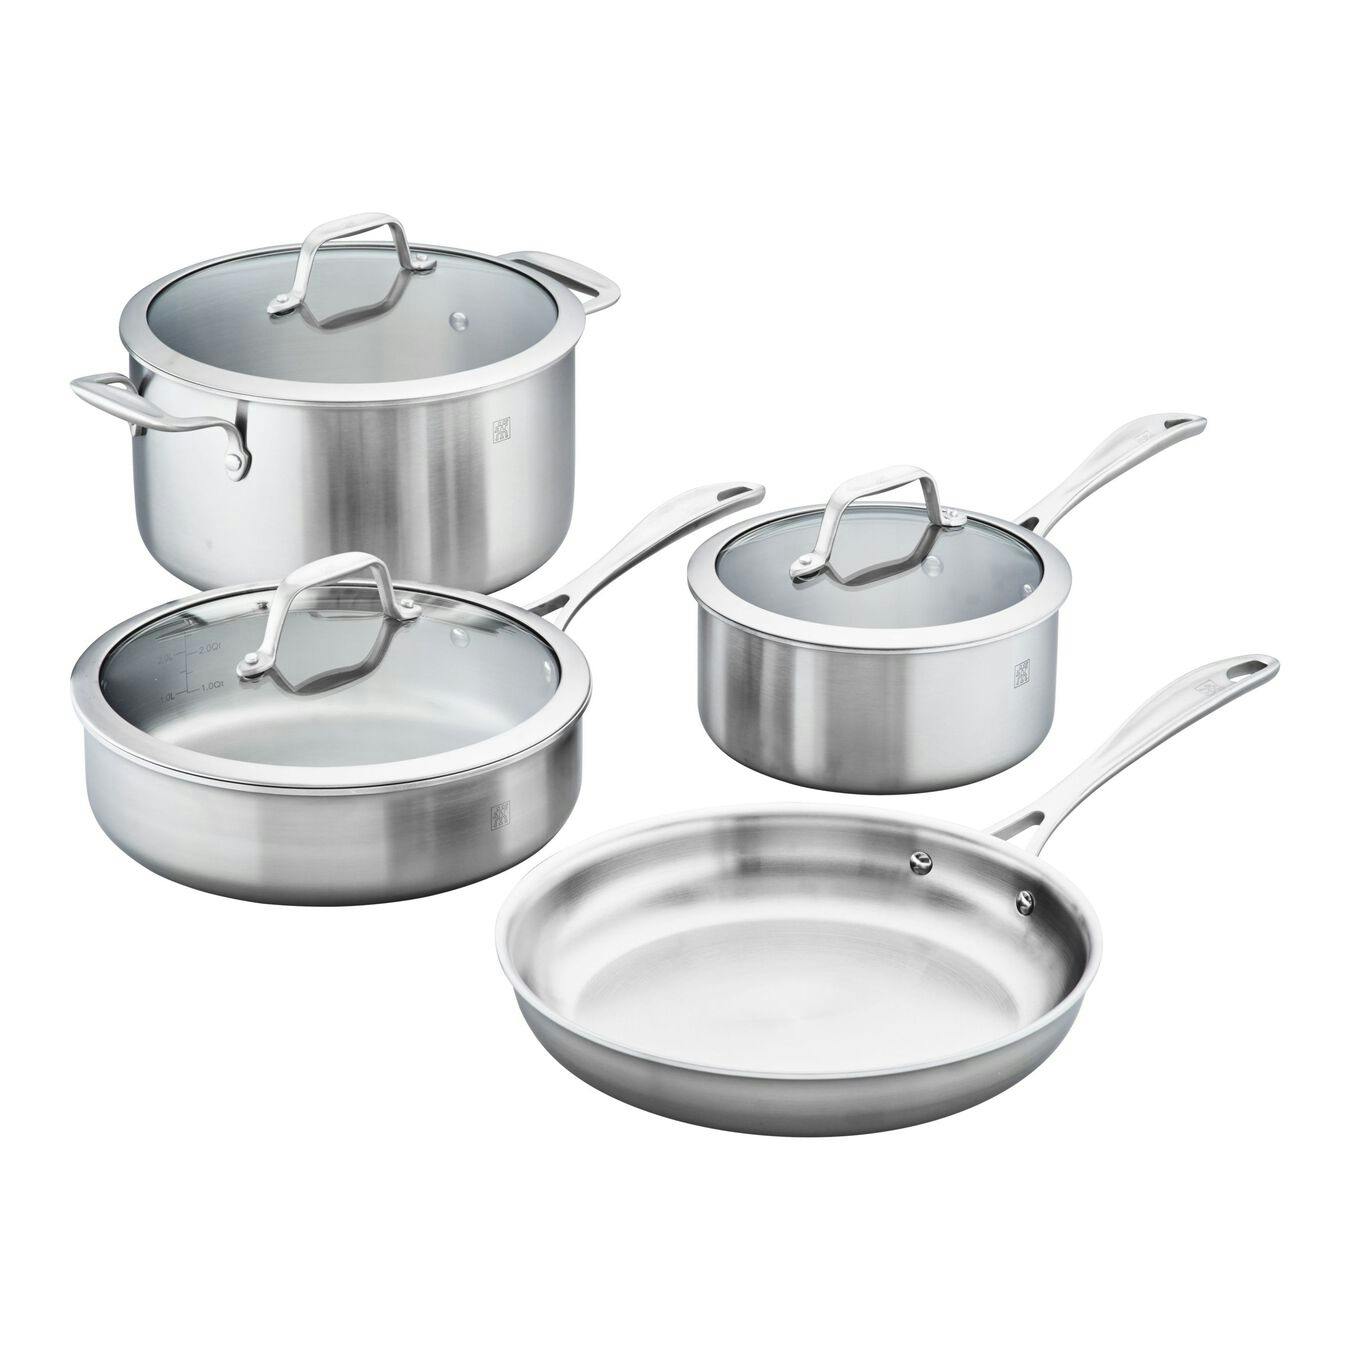 Zwilling Spirit 3-Ply 7-Pc Stainless Steel Cookware Set